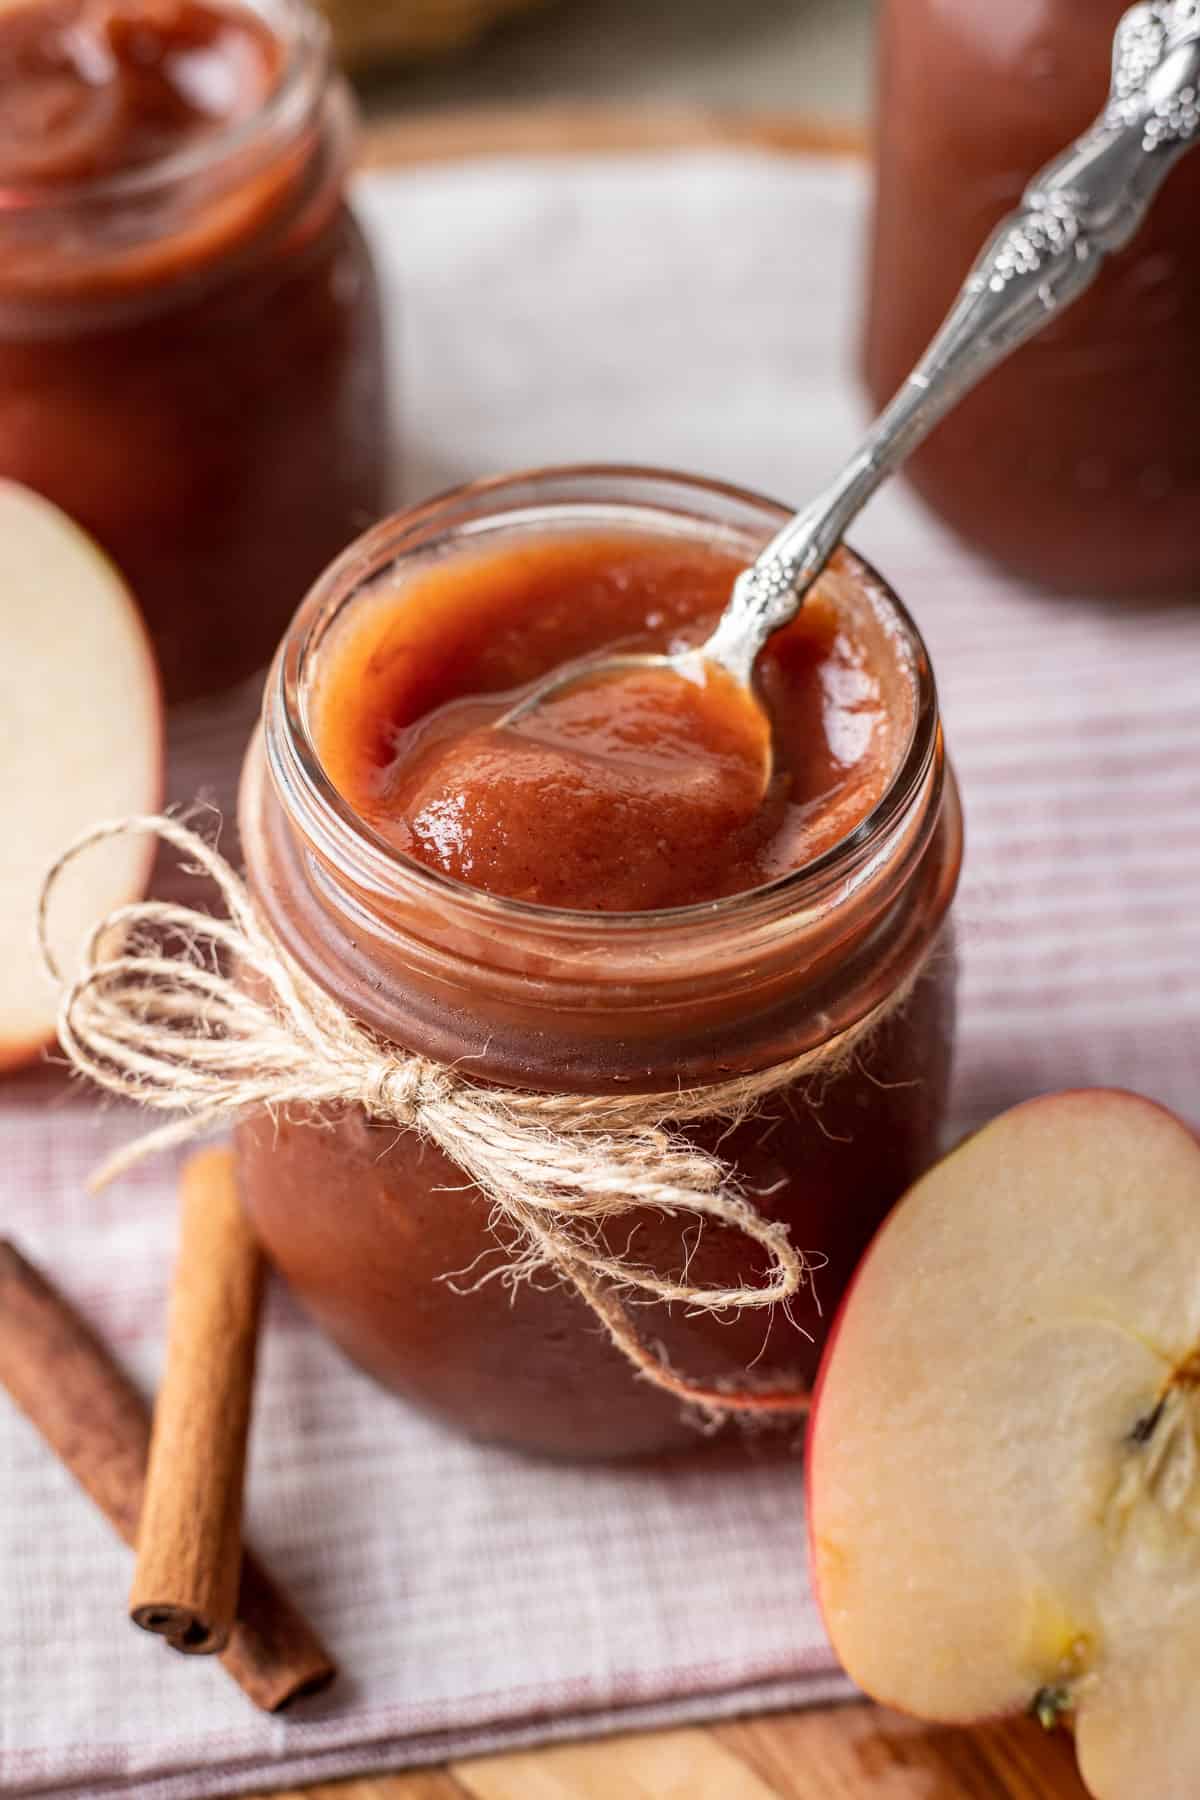 A spoon showing the smooth texture of the instant pot apple butter.